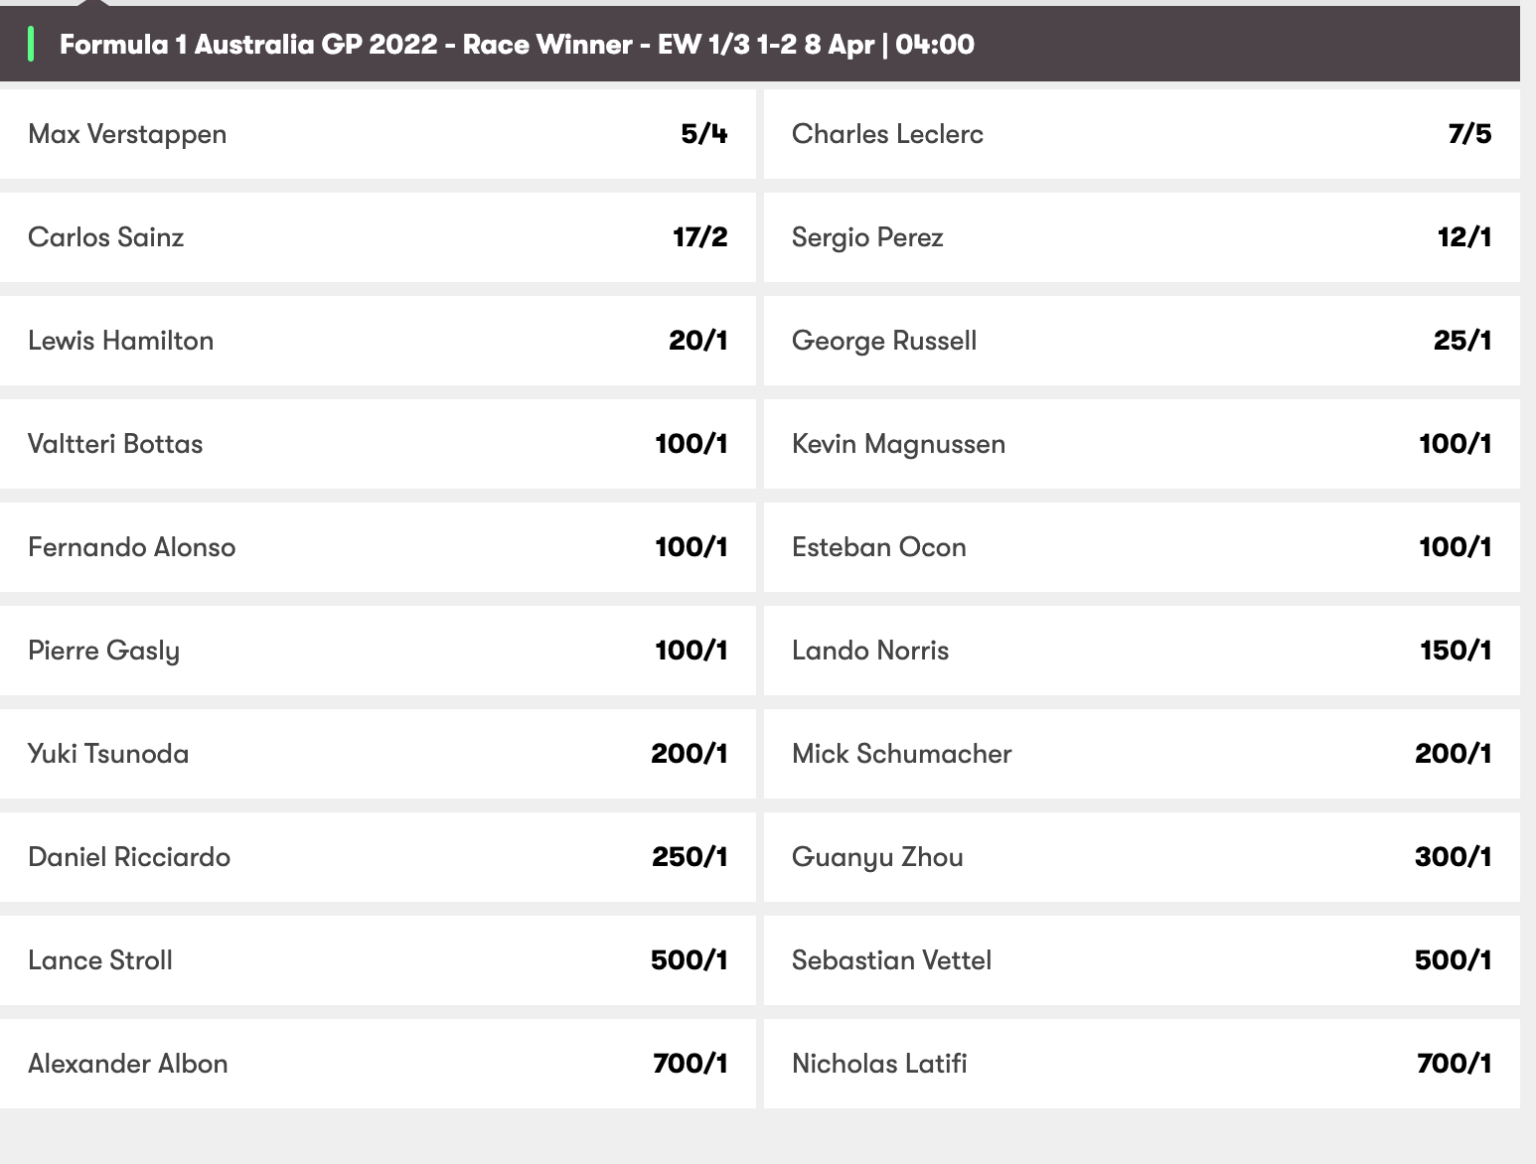 F1 Betting Tips and Predictions for the Australian GP Come To Play